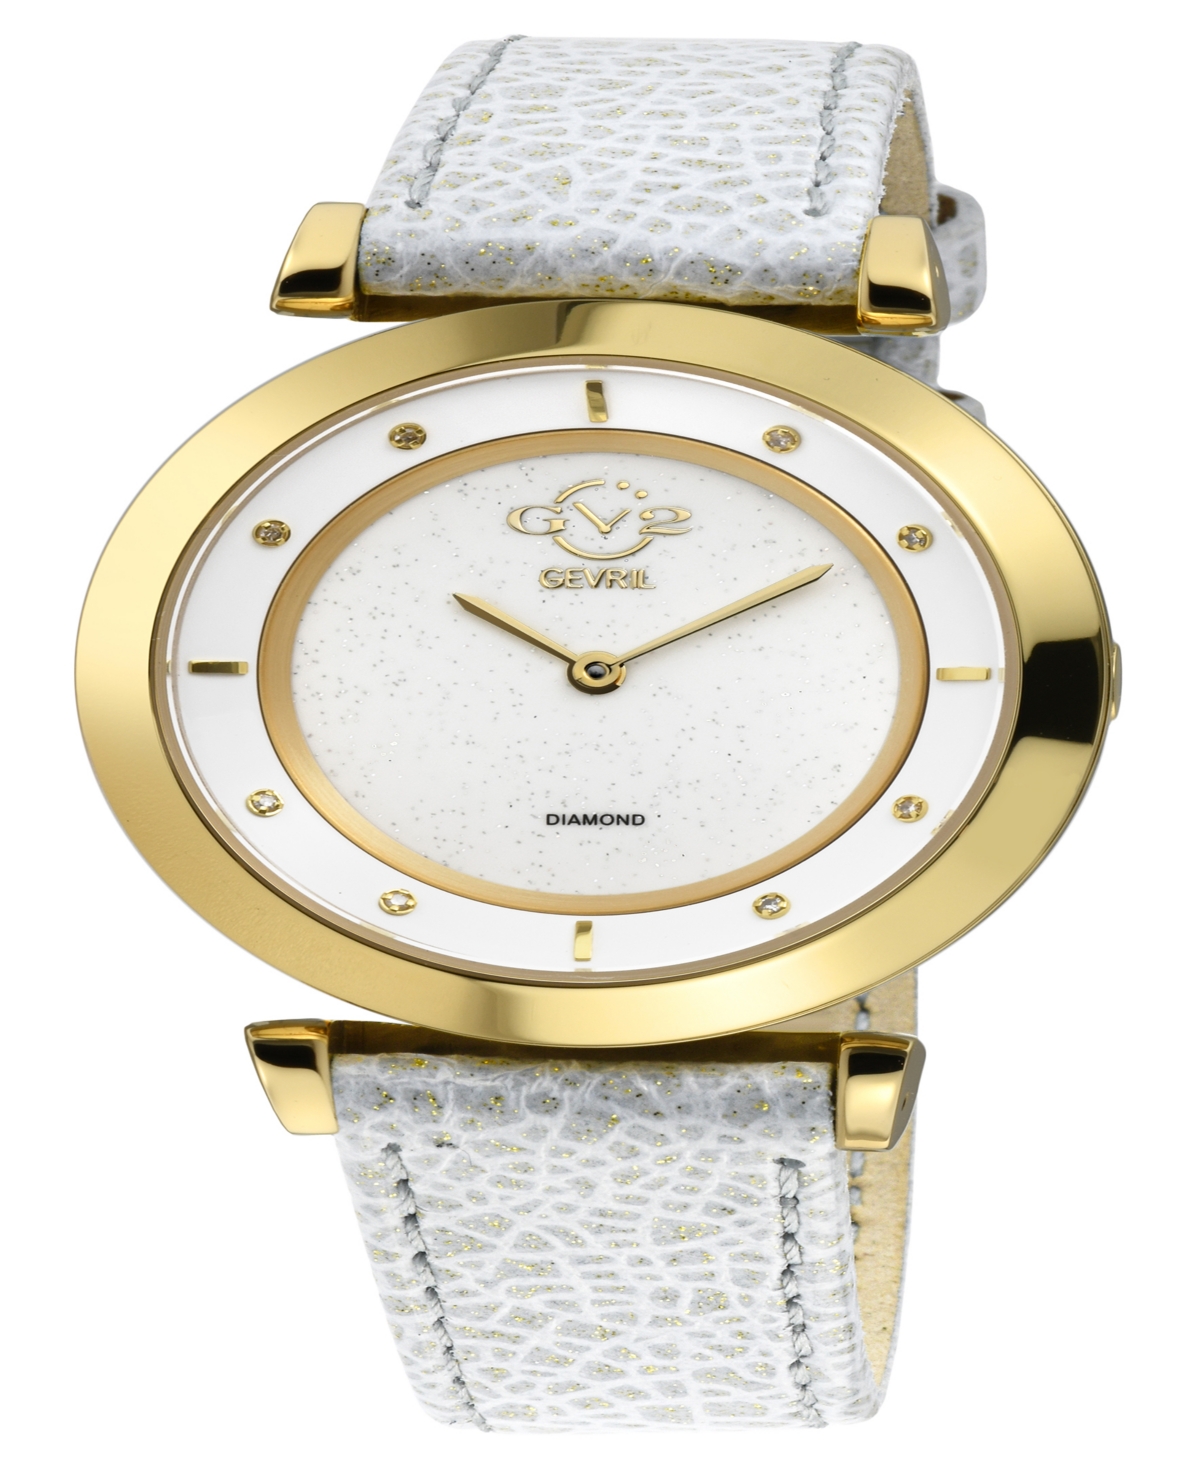 Gv2 By Gevril Women's Lombardy White Leather Watch 36mm